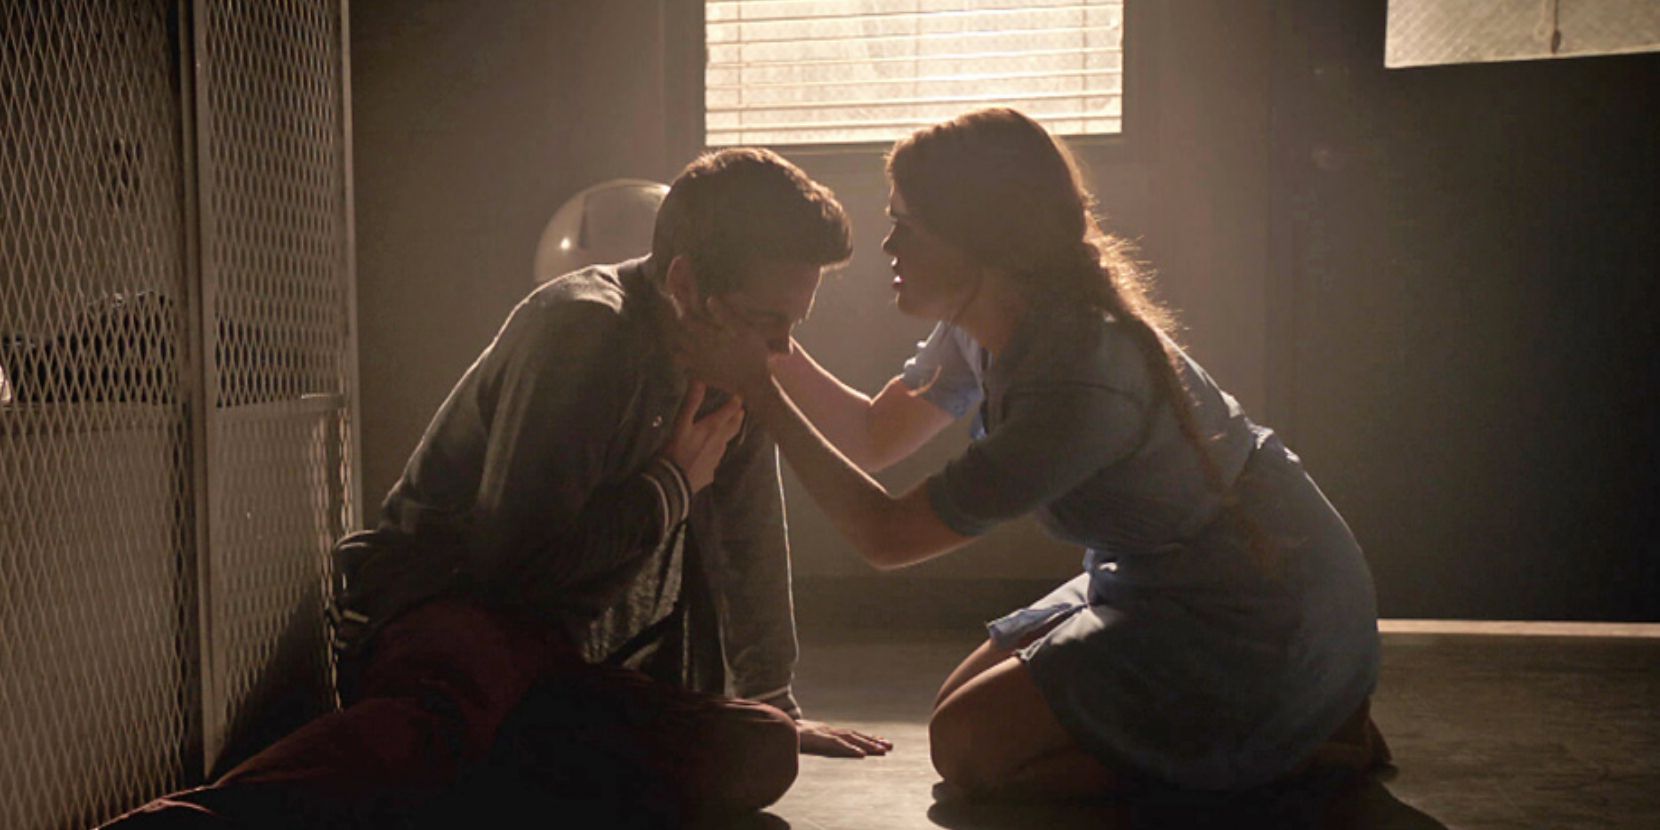 Stiles and Lydia kneel on the floor while she helps him through a panic attack in Teen Wolf